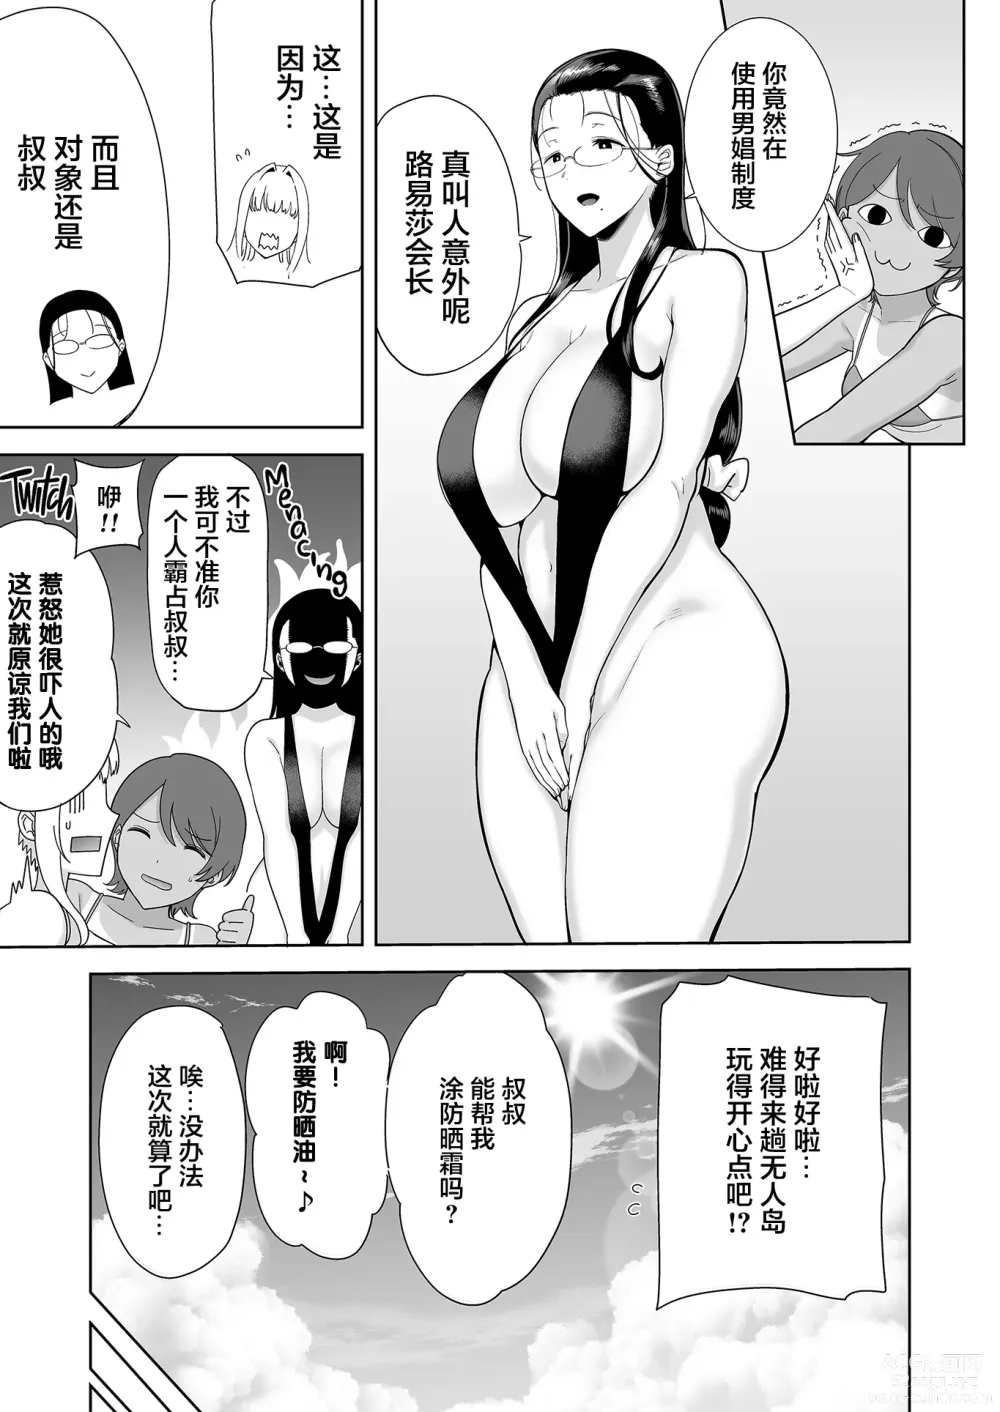 Page 9 of doujinshi 聖華女学院高等部公認竿おじさん 6